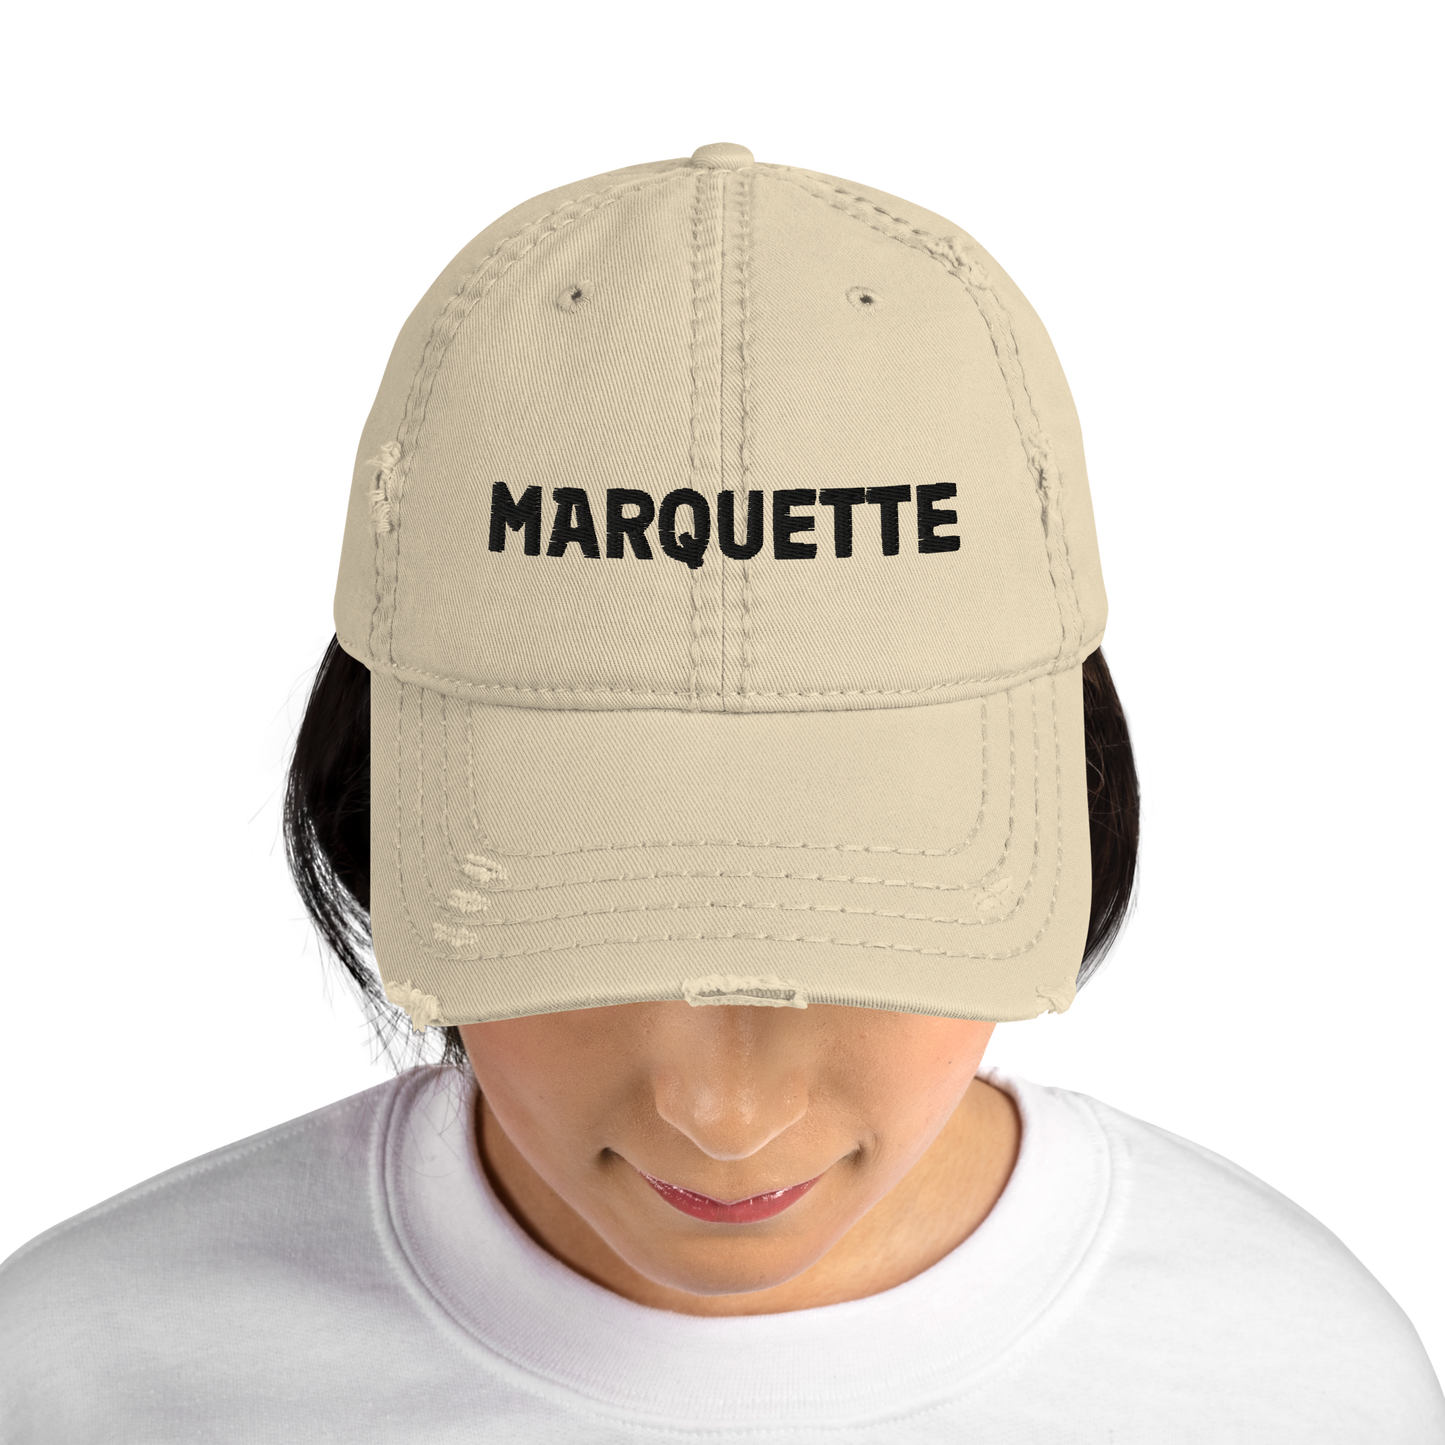 'Marquette' Distressed Dad Hat | White/Black Embroidery